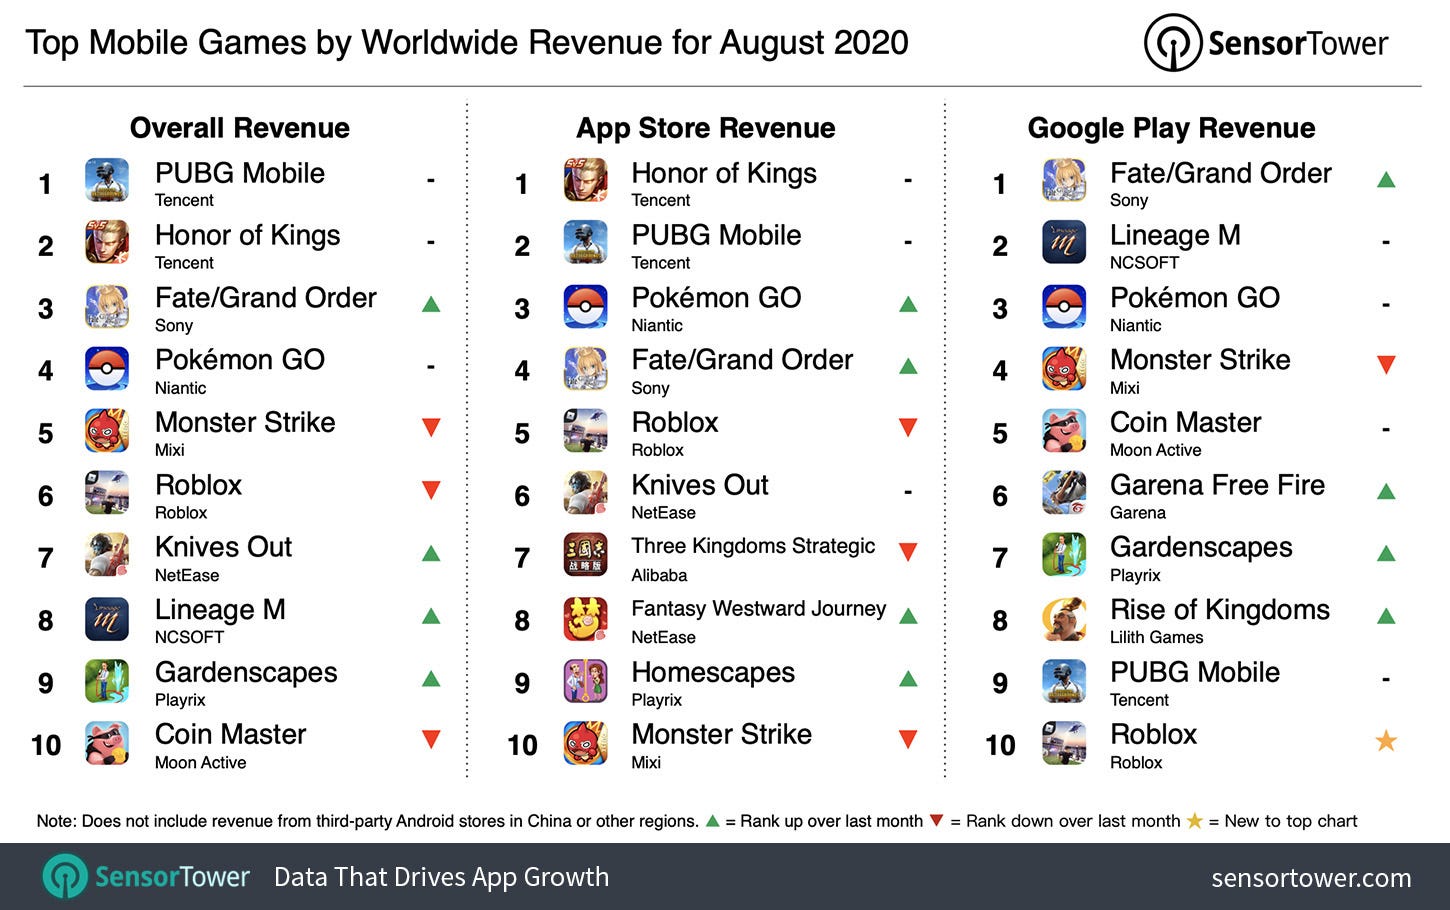 “Top Grossing Mobile Games Worldwide for August 2020